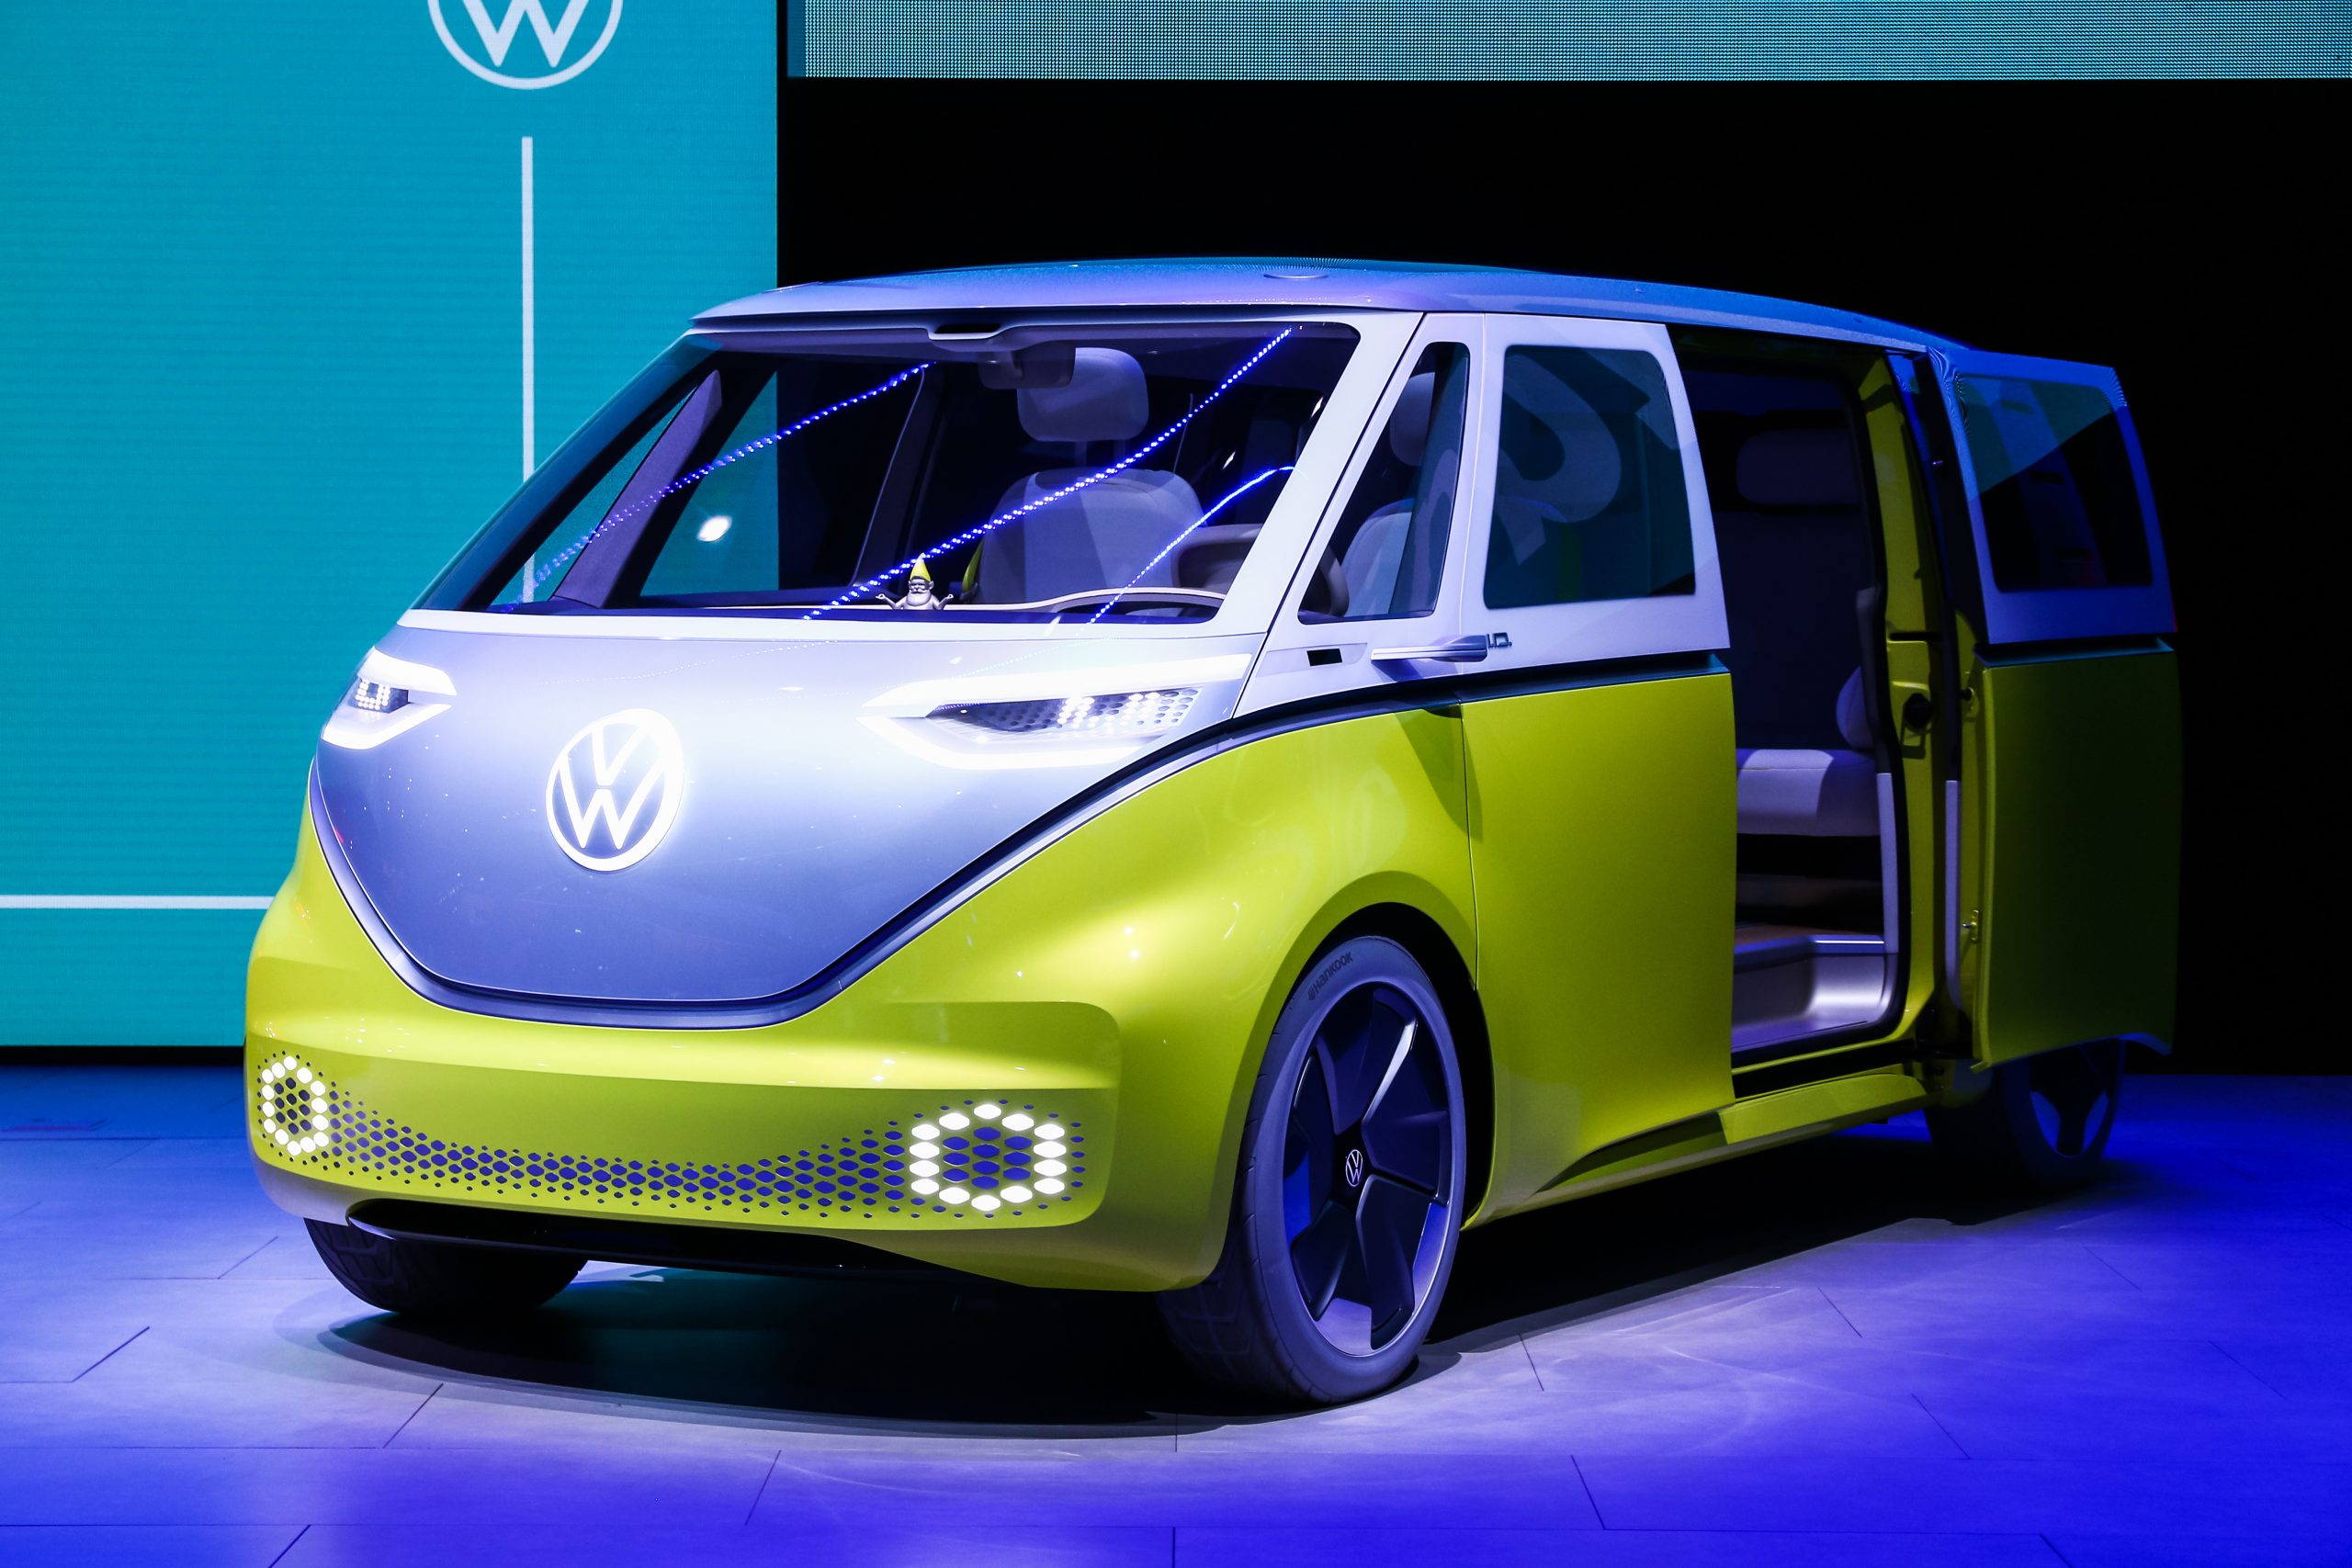 White and Lime green electric Volkswagen ID Buzz campervan. In a blue lit show room